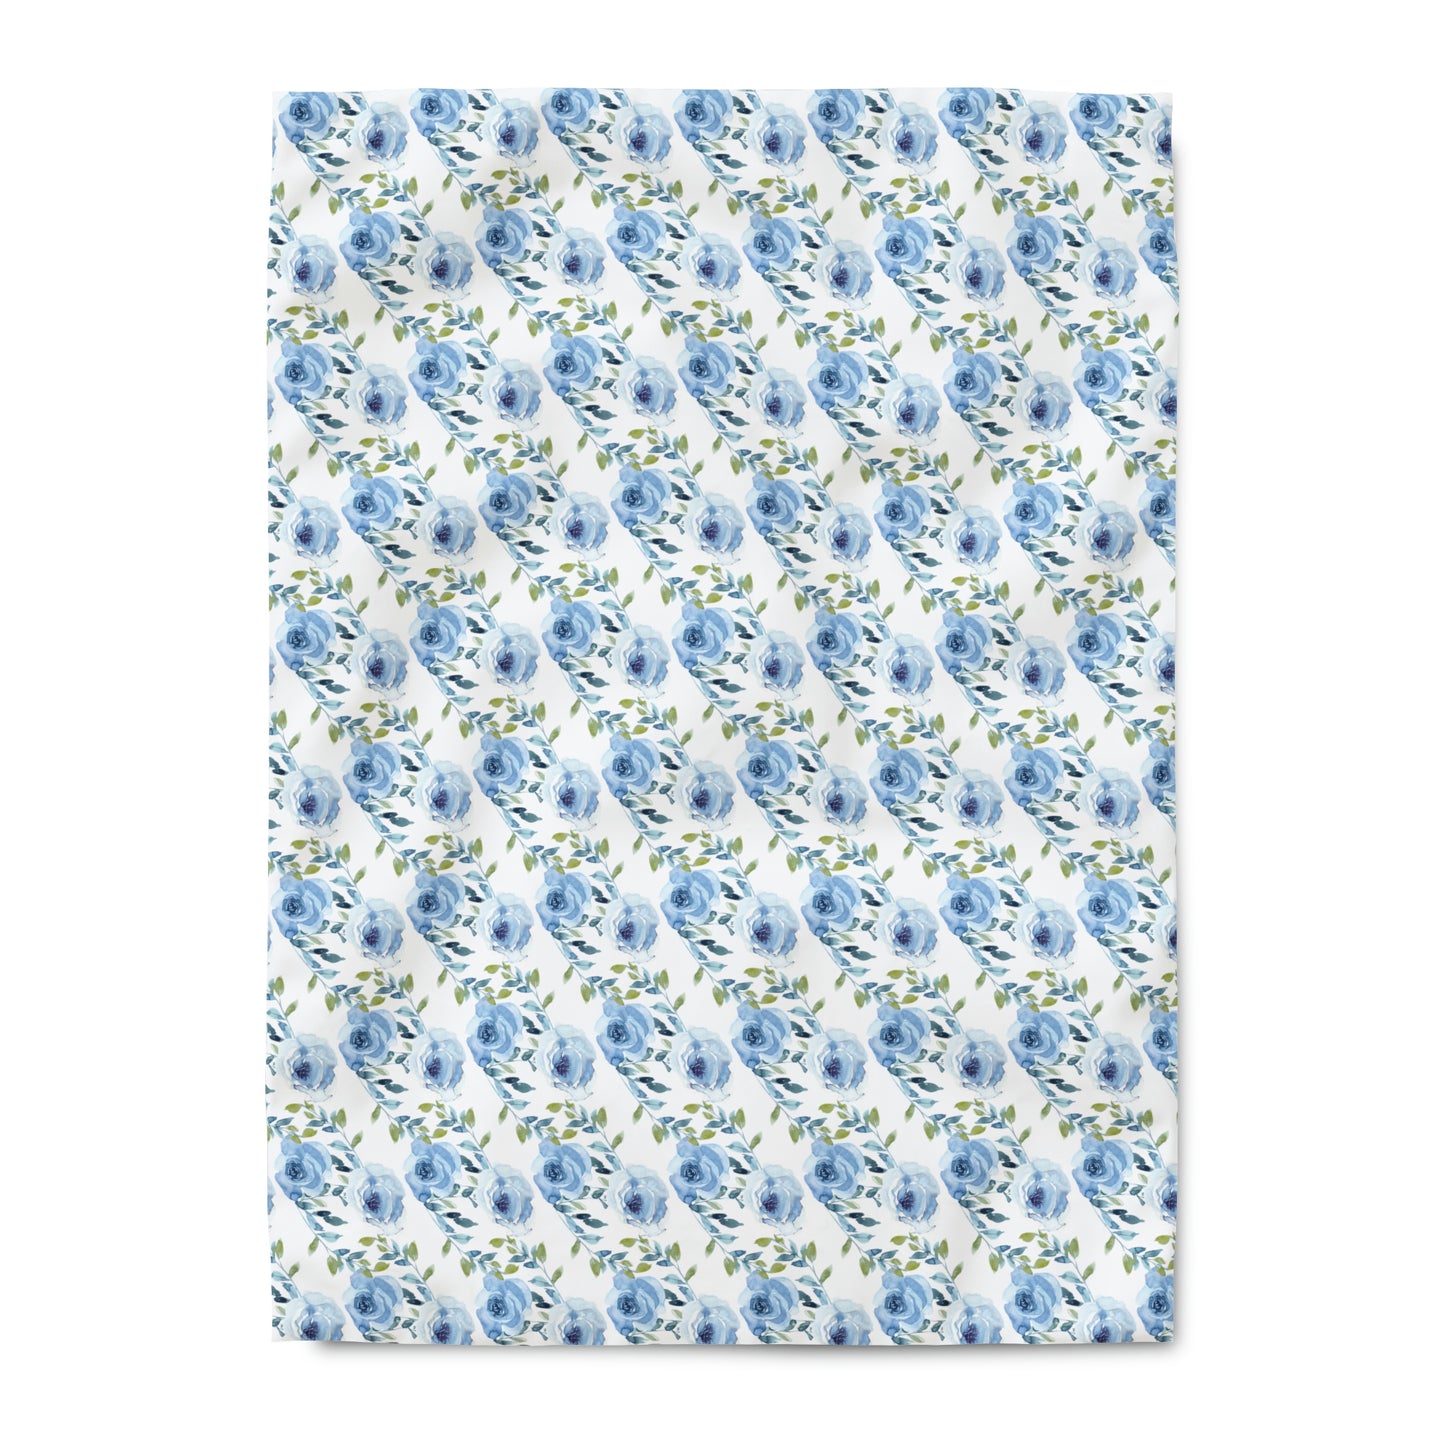 Watercolor Blue Roses Floral Pattern Duvet Cover lying on a bed, microfiber duvet cover bedroom accent